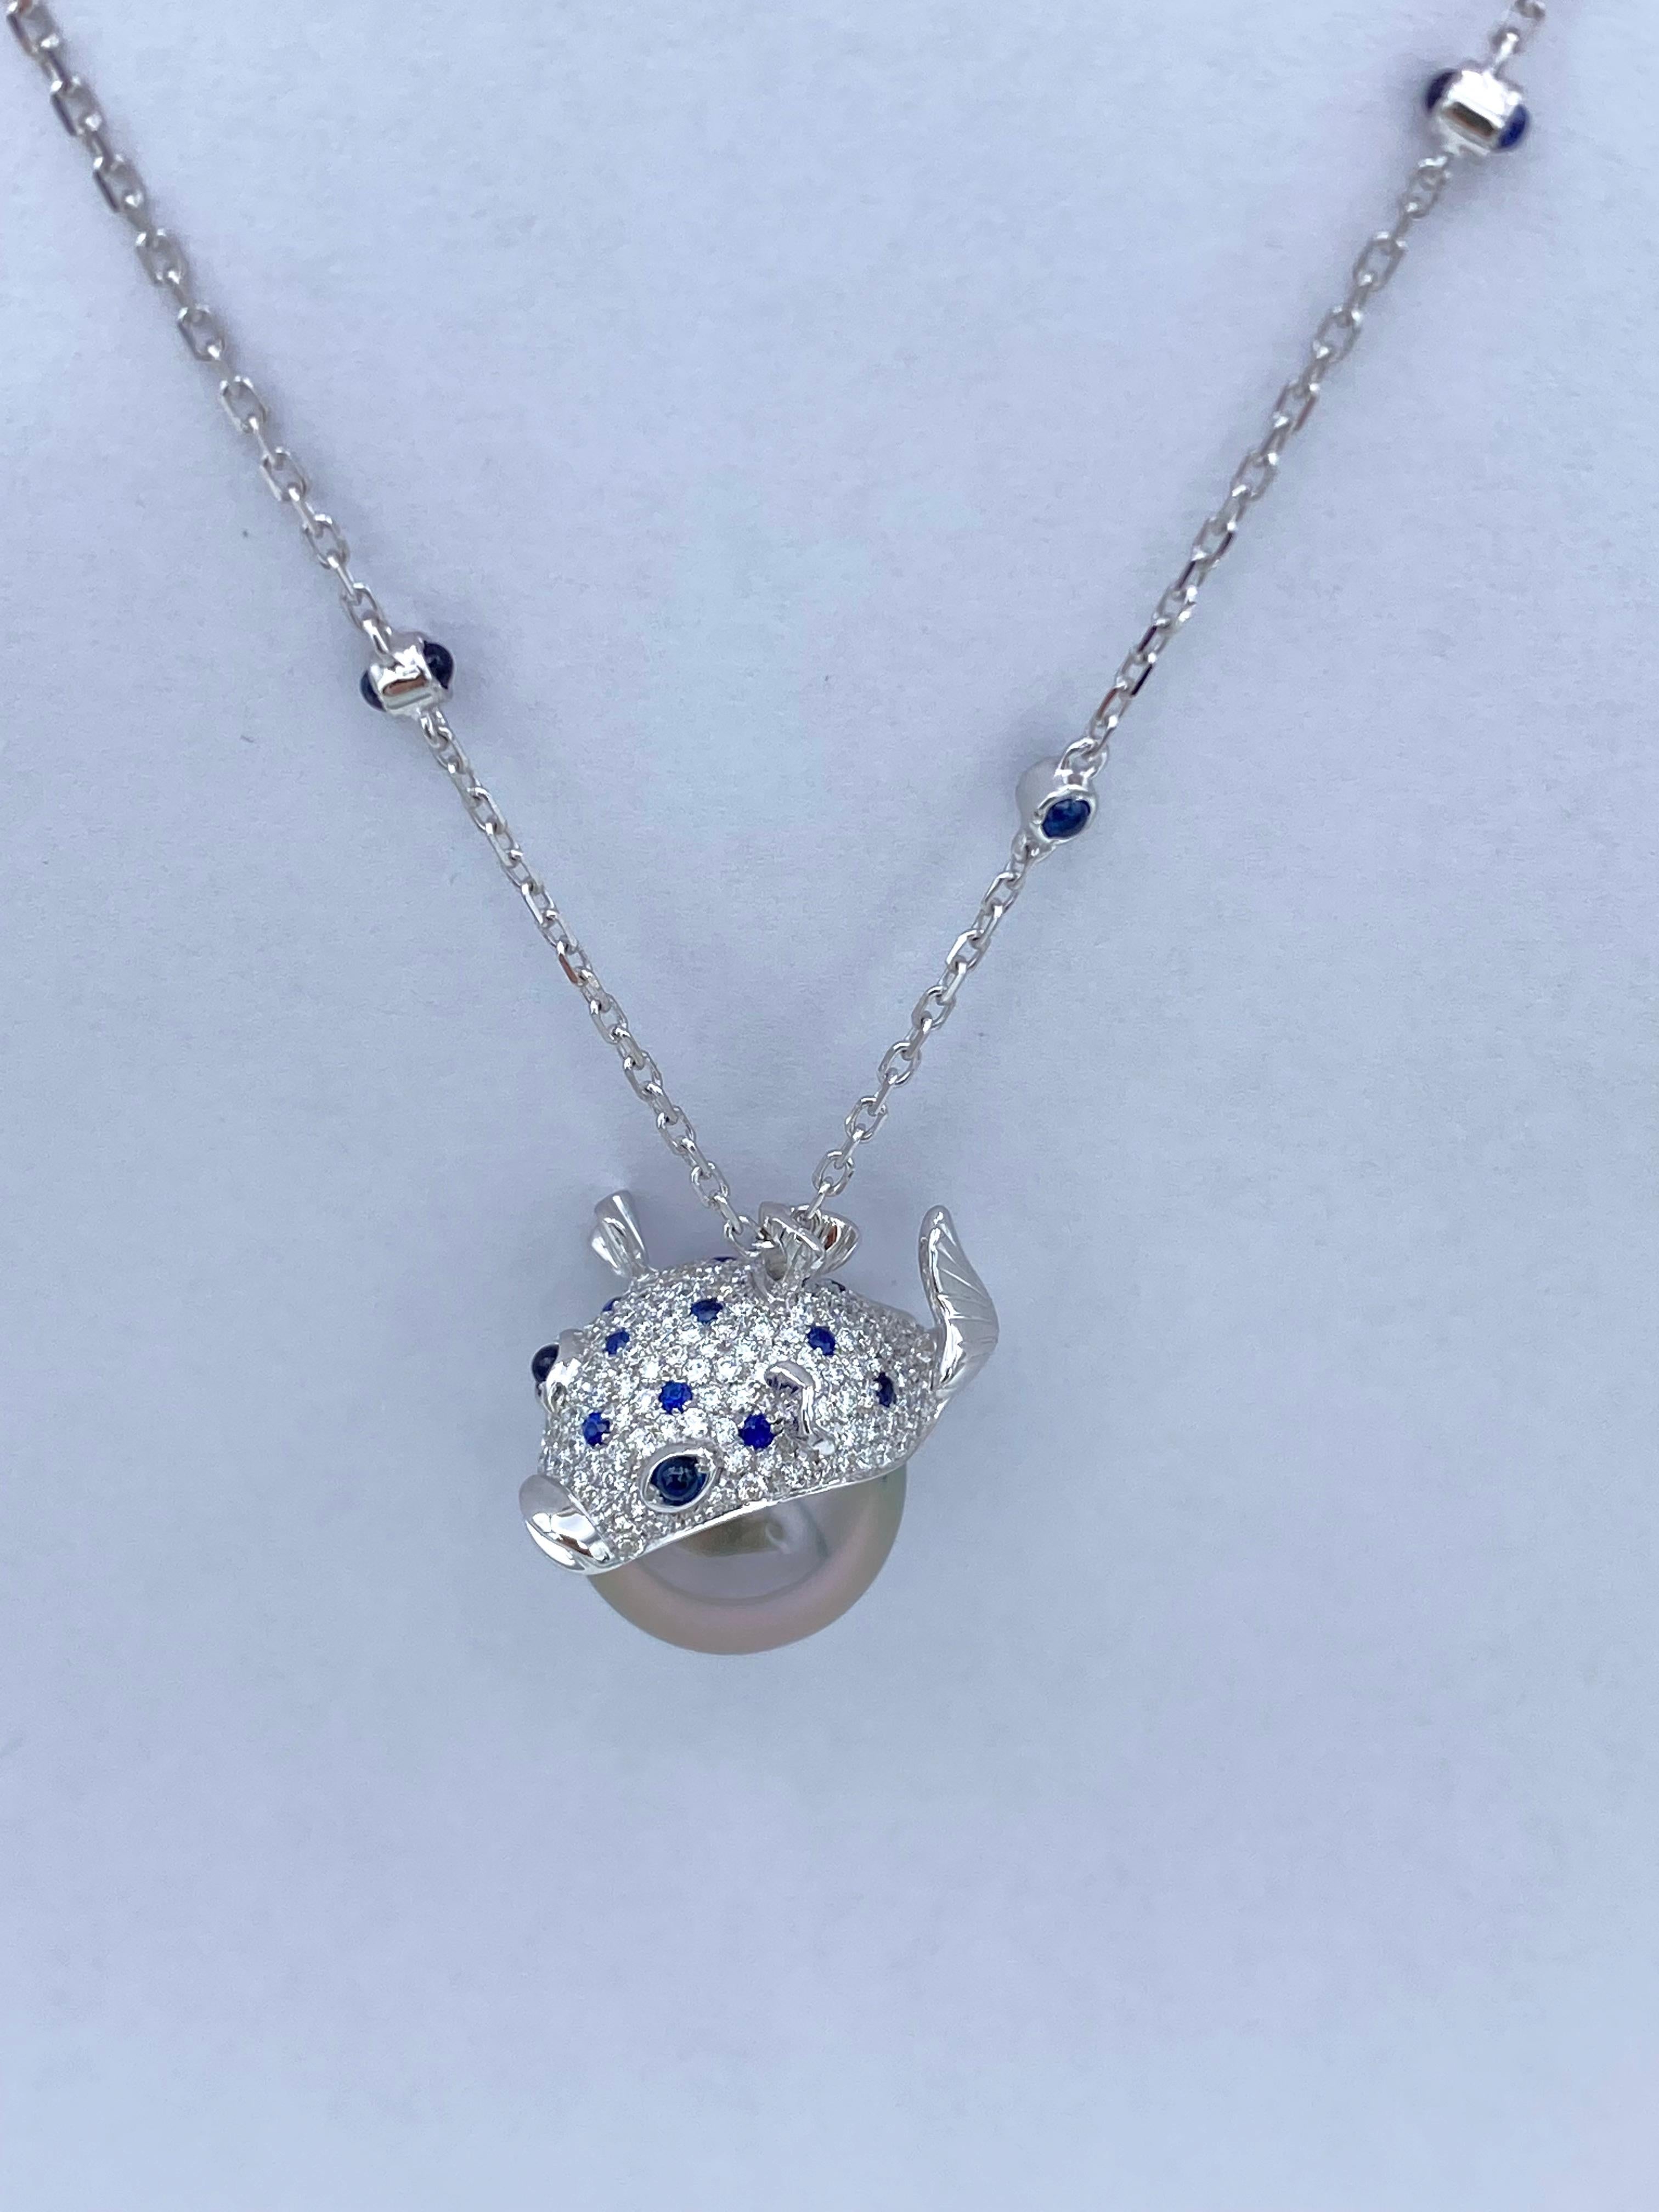 Pendant/Necklace Puffer Fish White Diamond Blue Sapphire Tahiti Pearl 18Kt Gold 
With a very beautiful spherical Tahiti Pearl (14.00 mm diameter) I created a pendant inspired by the sea world, in particular this is a Puffer fish. The portion in gold